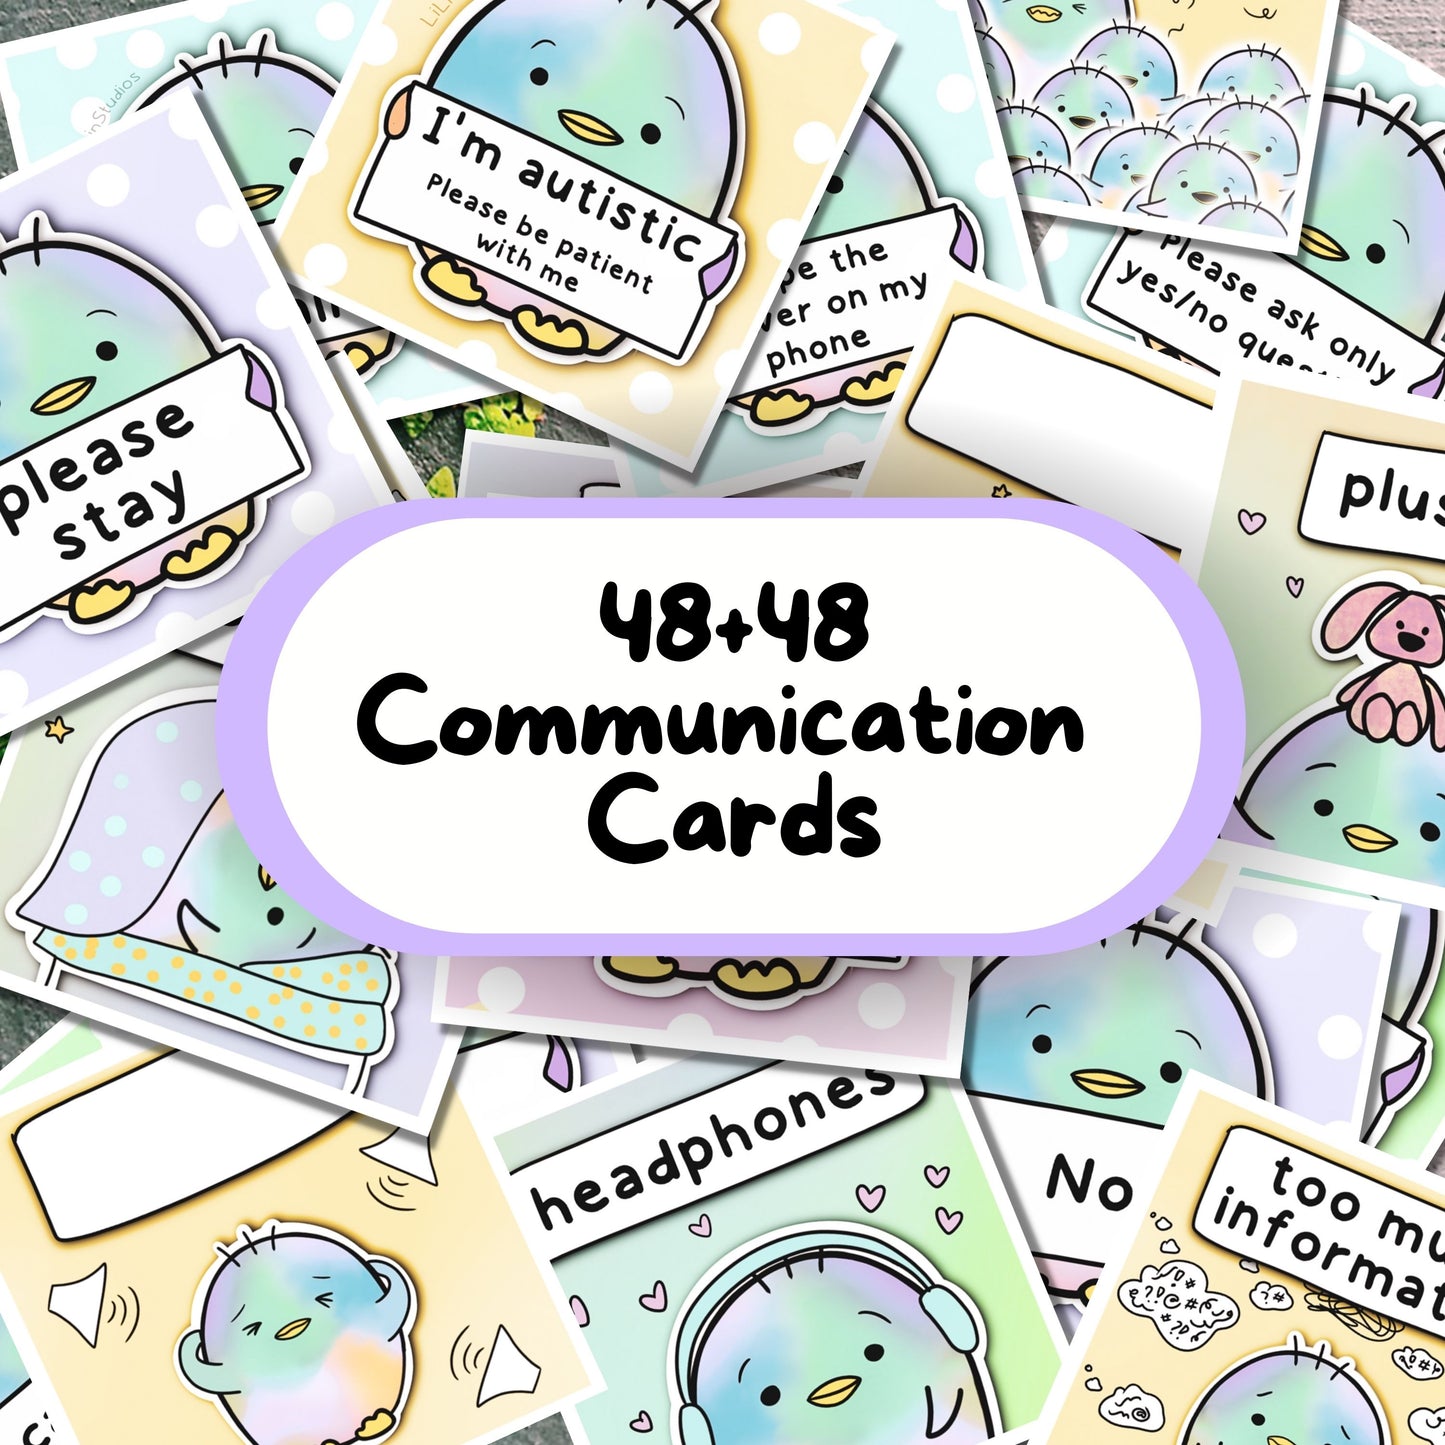 Affirmation and Communication Cards Bundle Written and hand-drawn by an autistic artist (LiL Penguin Studios (autism_happy_plance on Instagram)